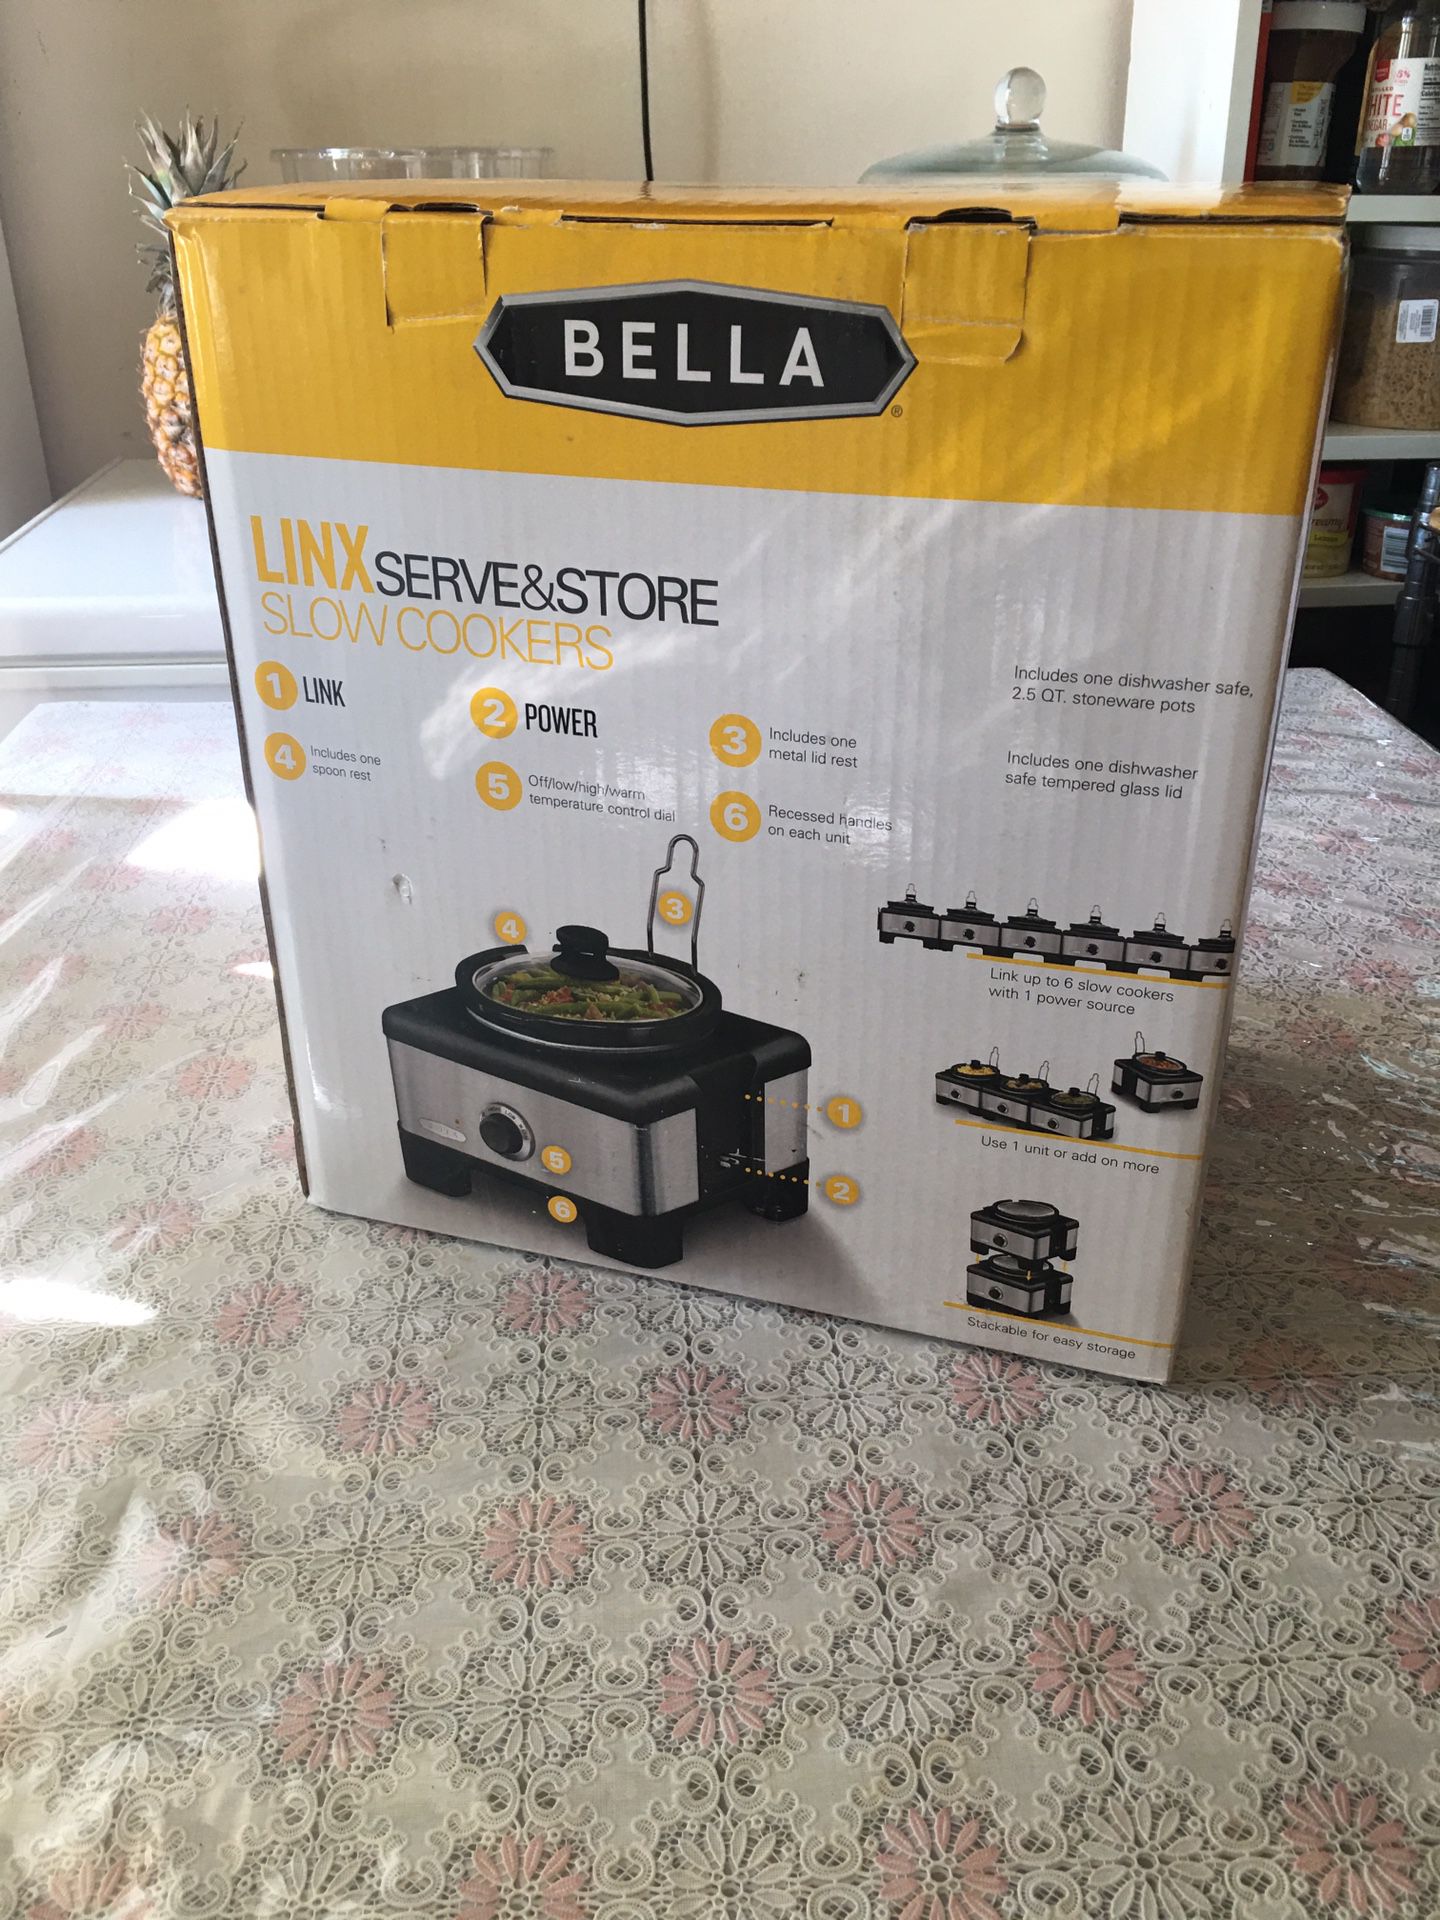 Bella - 5-qt. Slow Cooker with Dipper - Stainless Steel for Sale in Salem,  OR - OfferUp